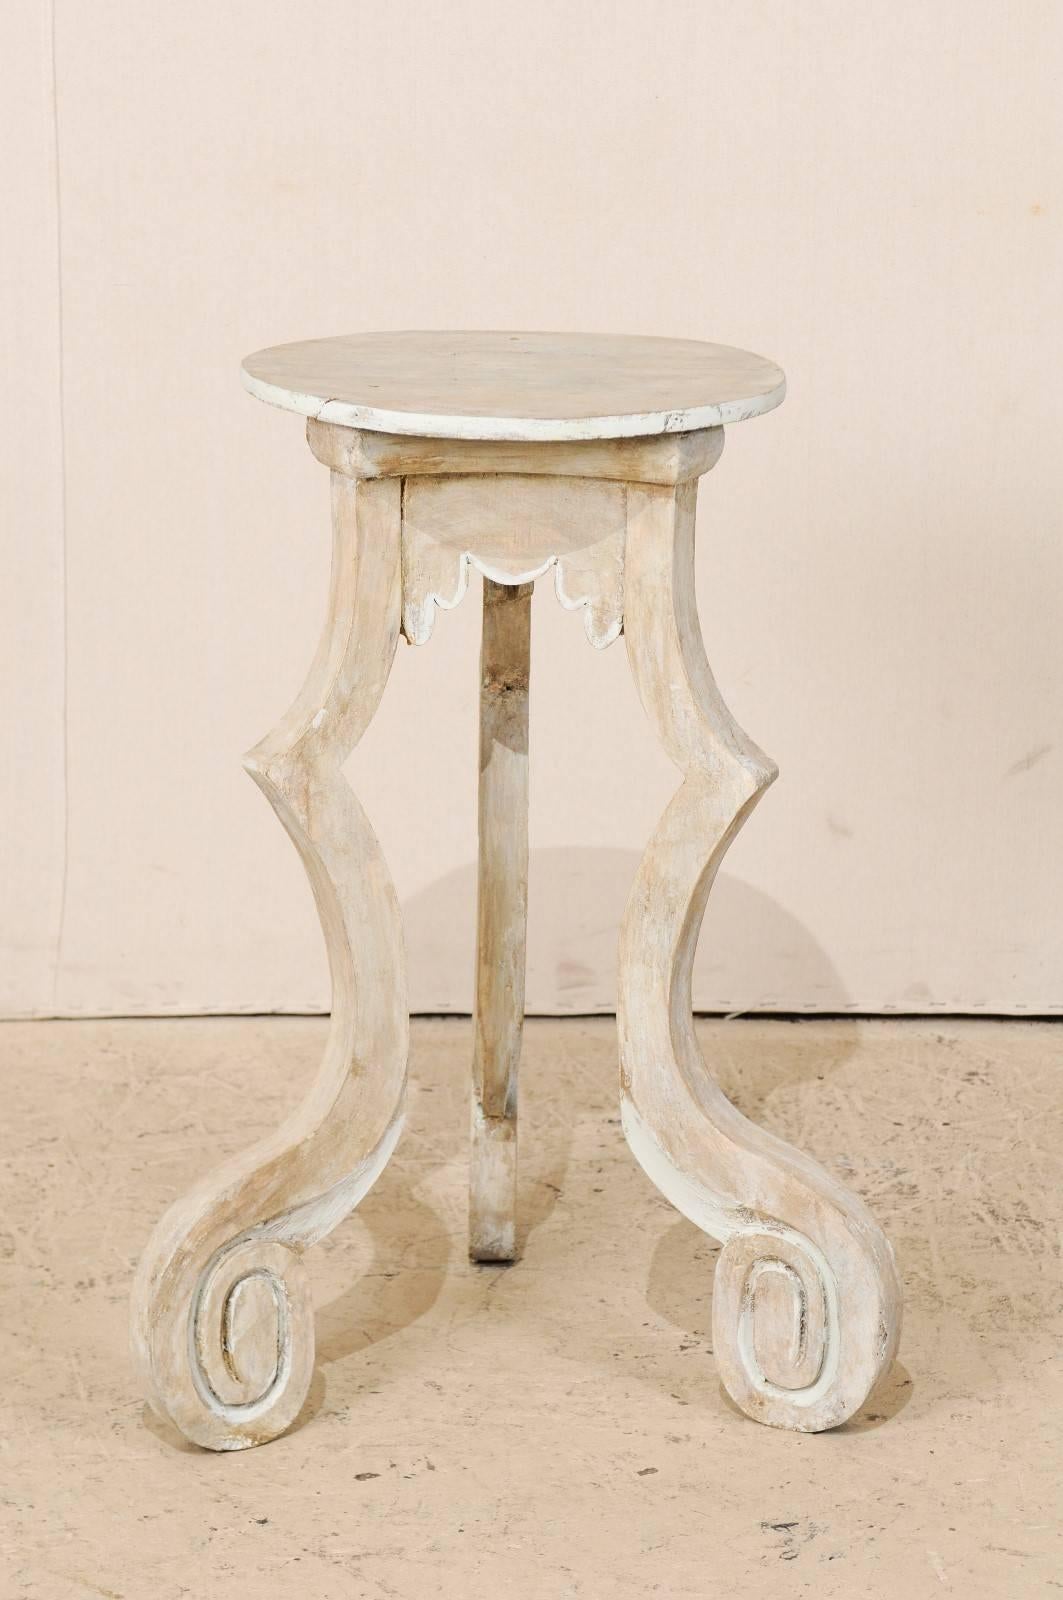 A Spanish light colored painted wood table stand. This relatively small Spanish table from the early 20th century is sure to add a bit of whimsy to any room! This table has a round shaped top and scalloped skirt. There are three quirky legs which